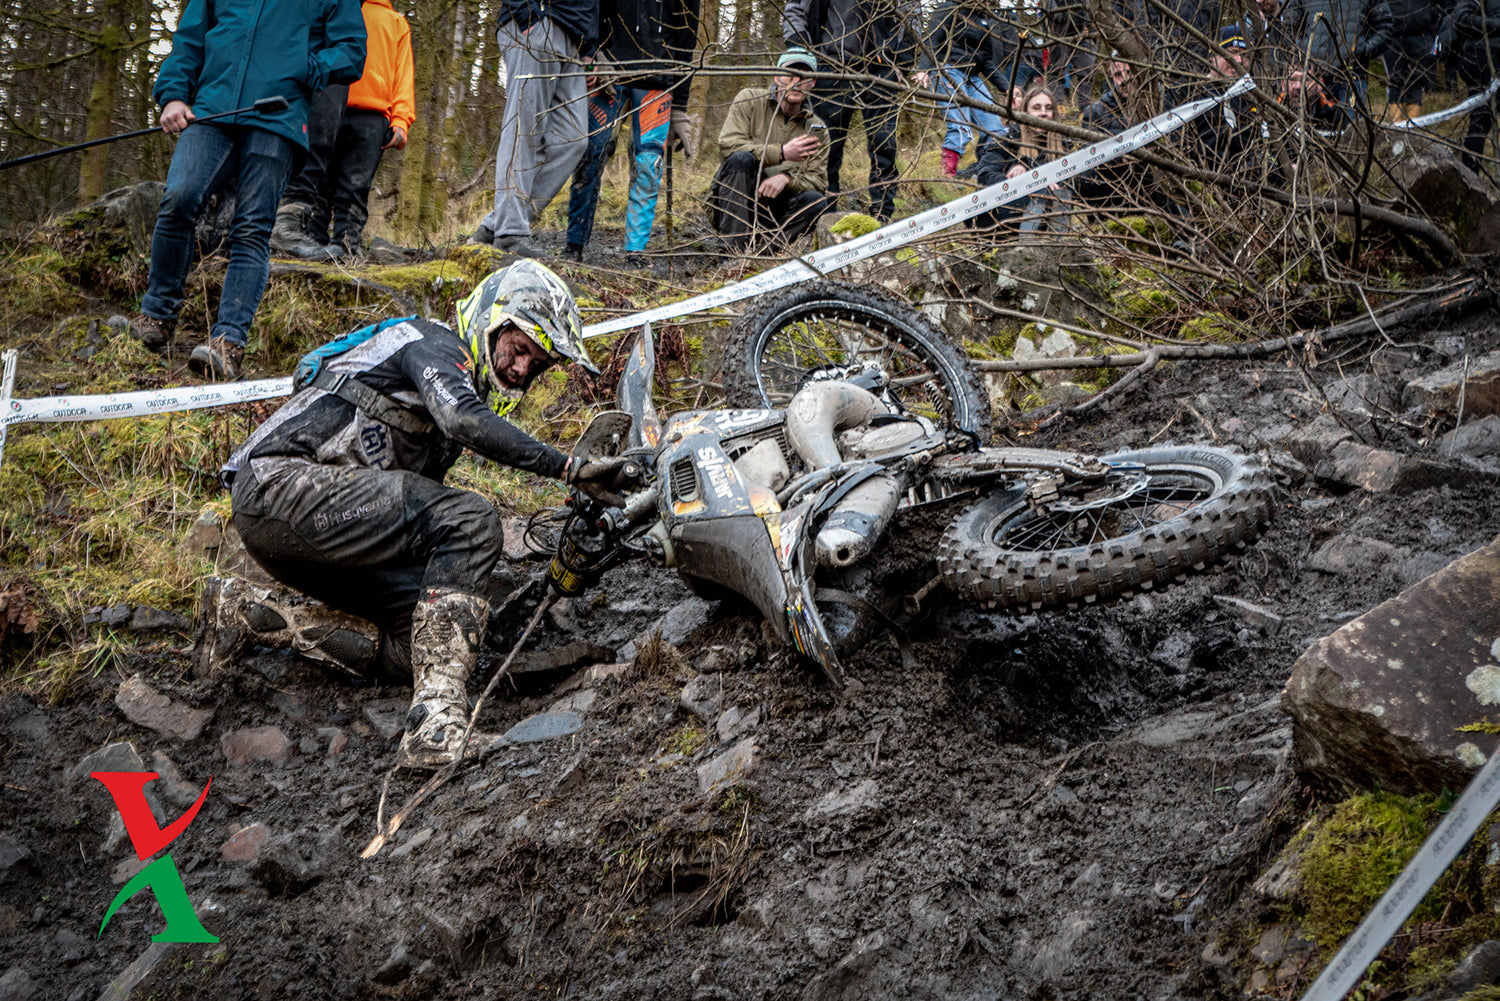 Video from the 2022 Valleys Xtreme Hard Enduro Event